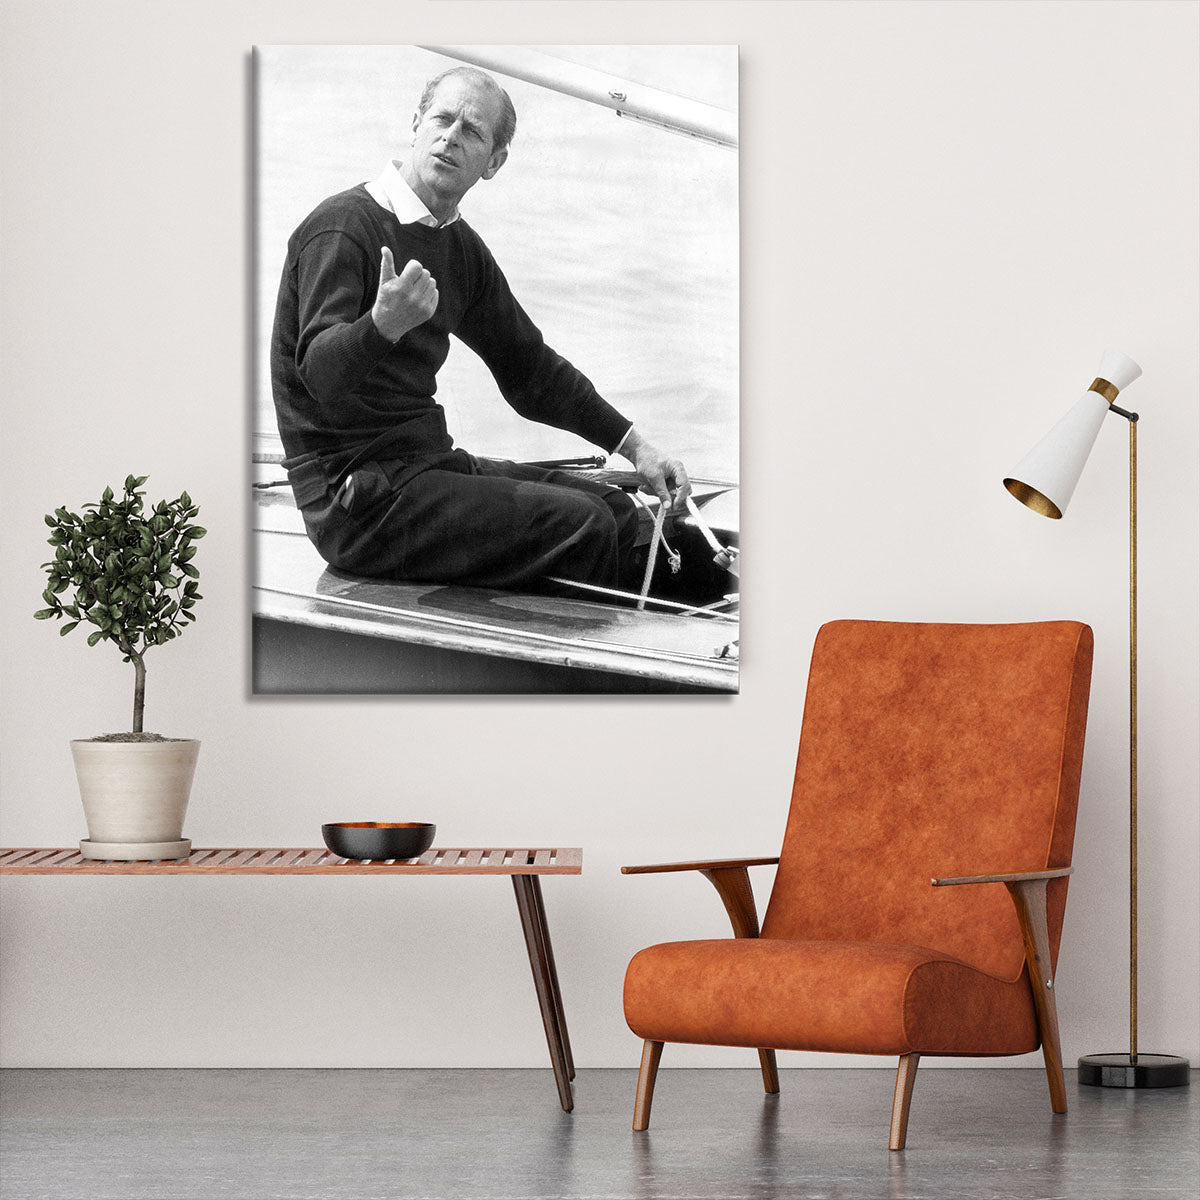 Prince Philip resting after racing at Cowes Isle of Wight Canvas Print or Poster - Canvas Art Rocks - 6